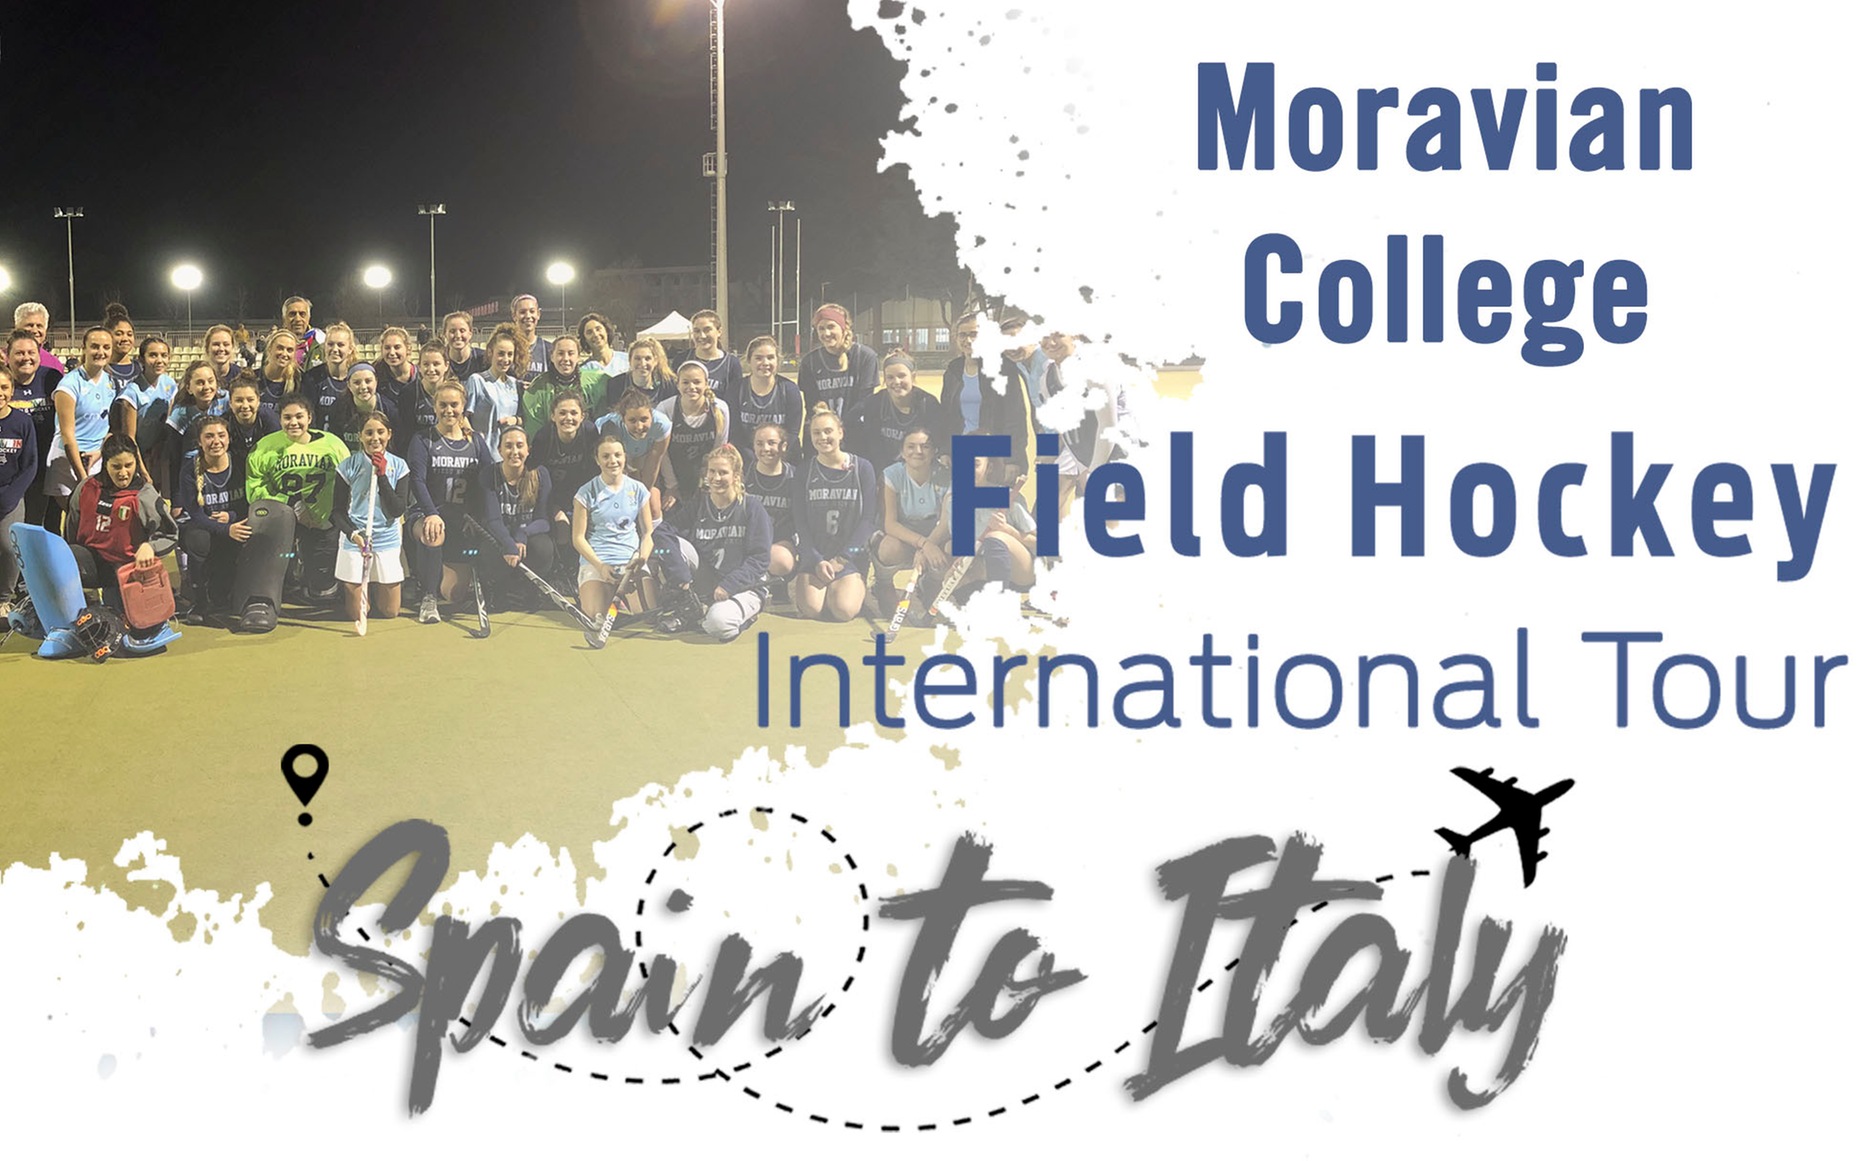 Field hockey team International tour to Spain and Italy in January 2019.